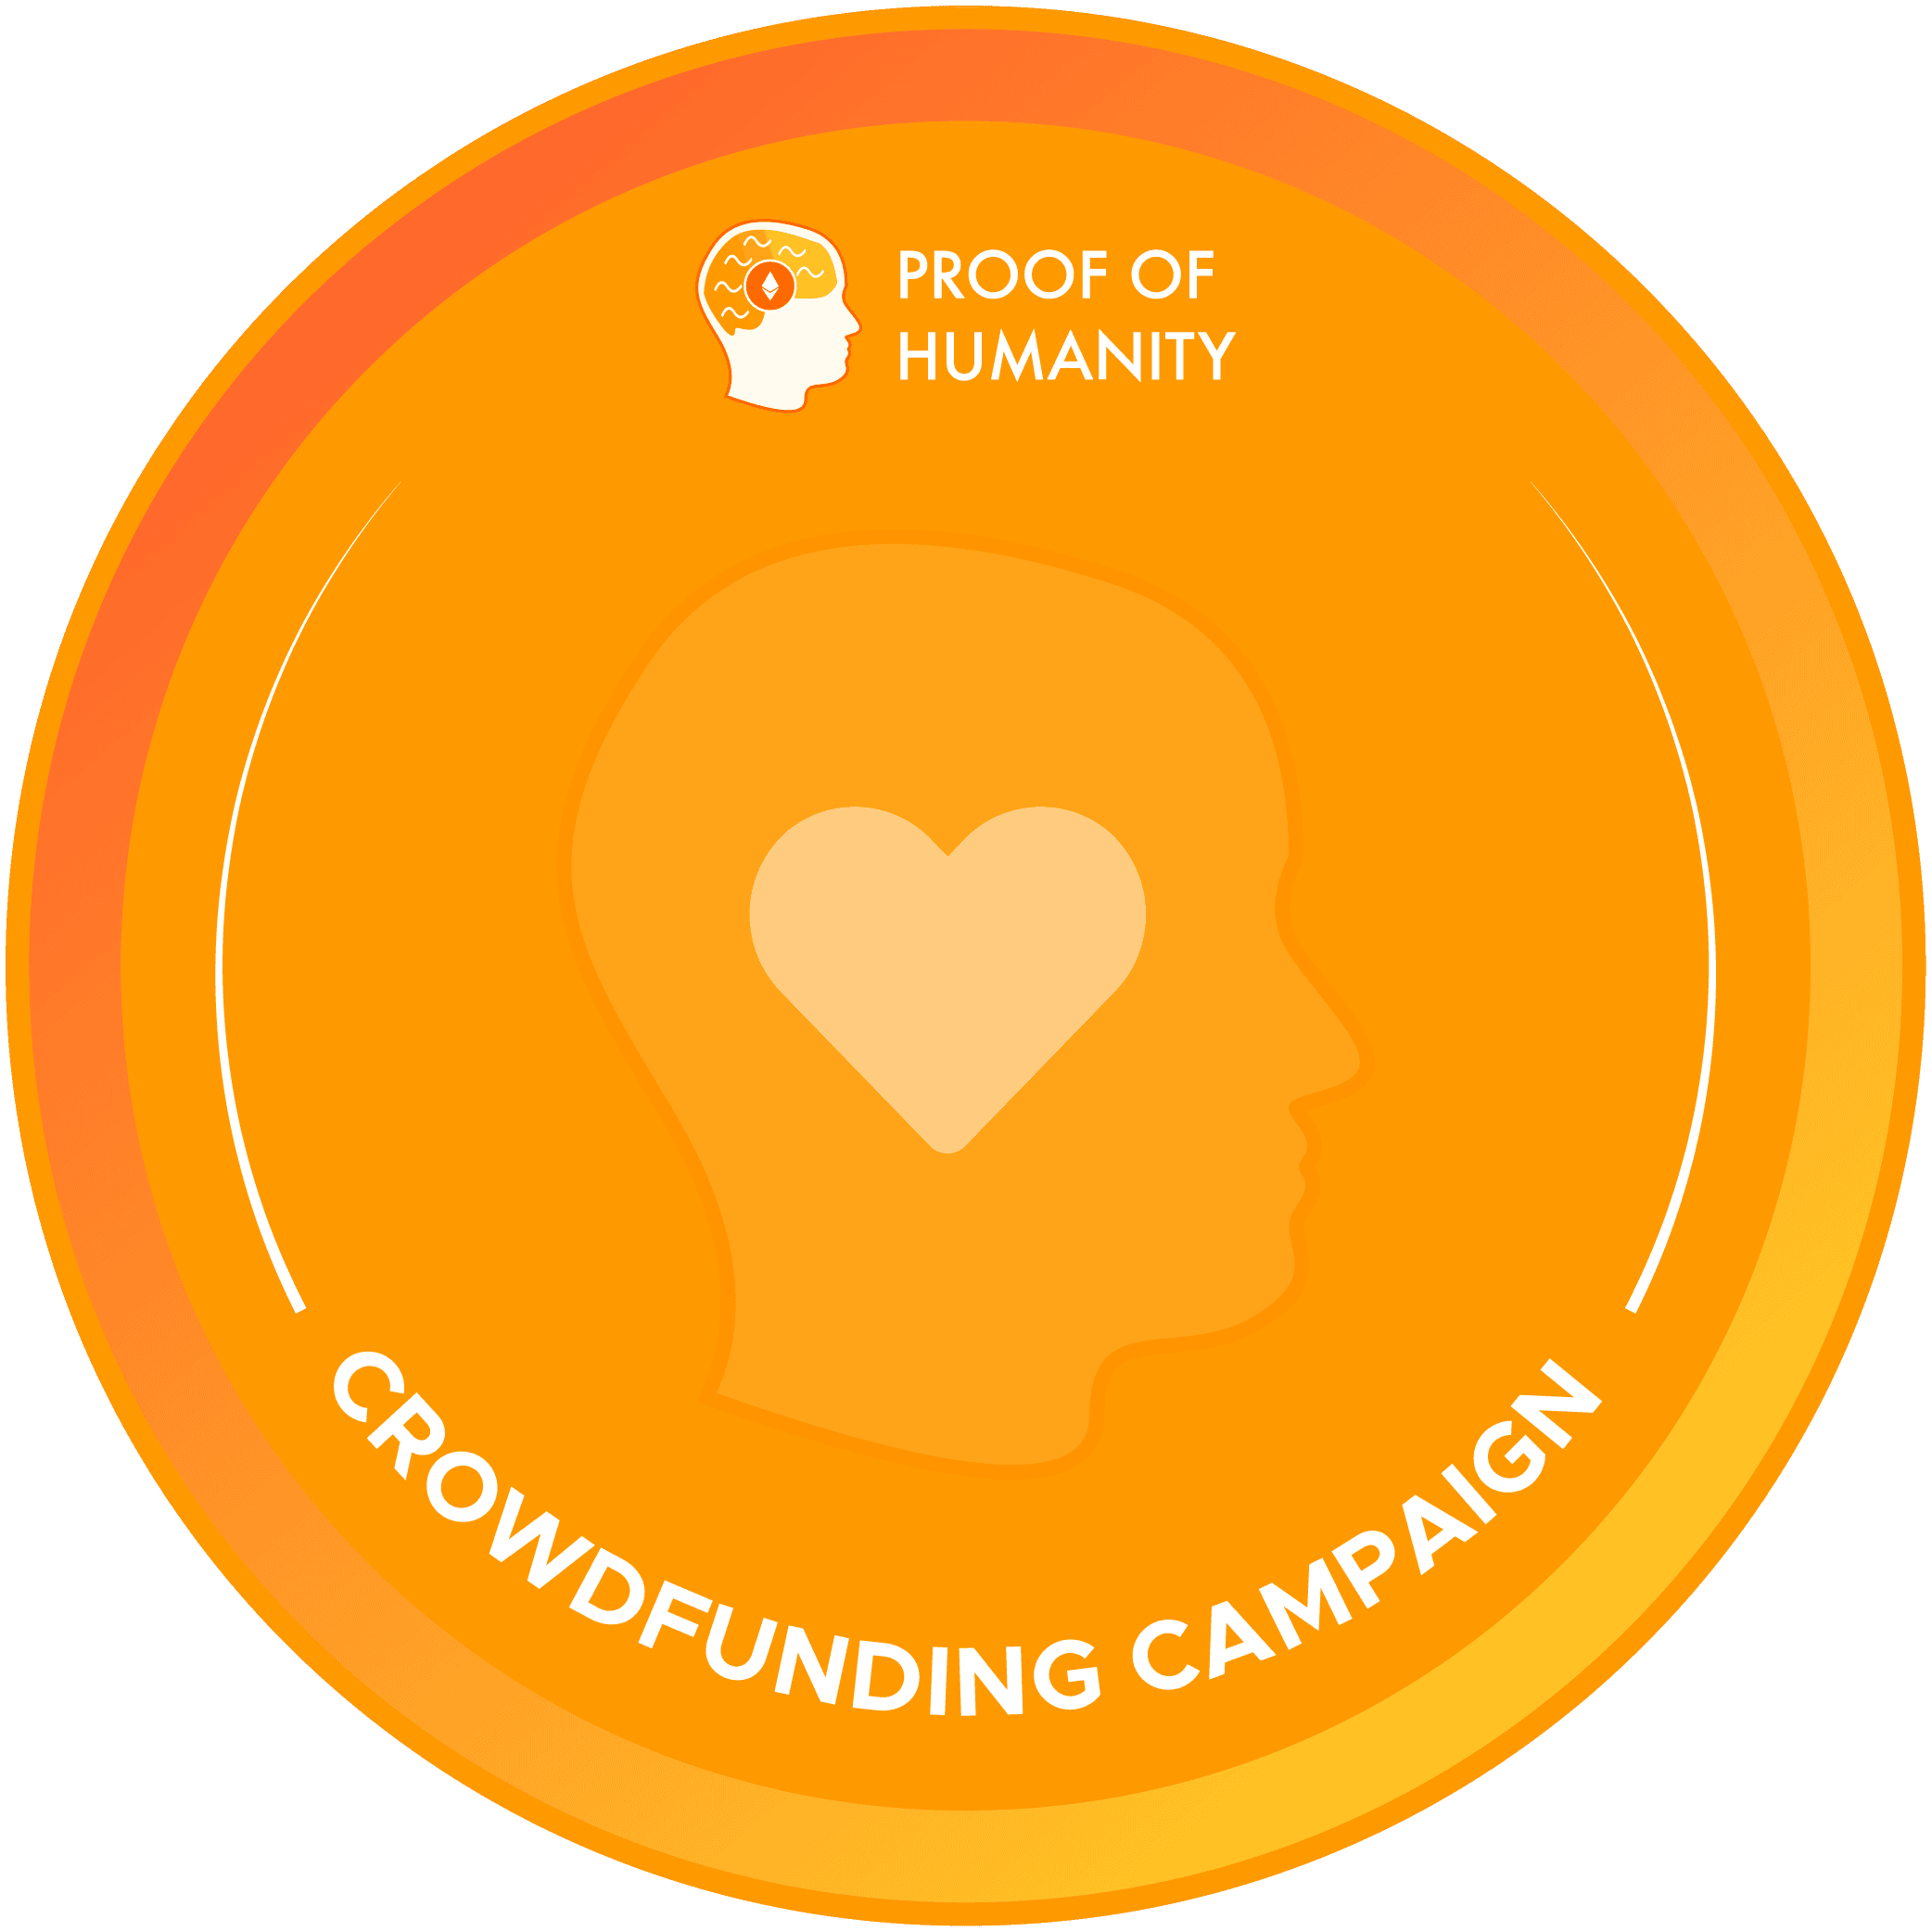 Proof of Humanity - Crowd-funding campaign